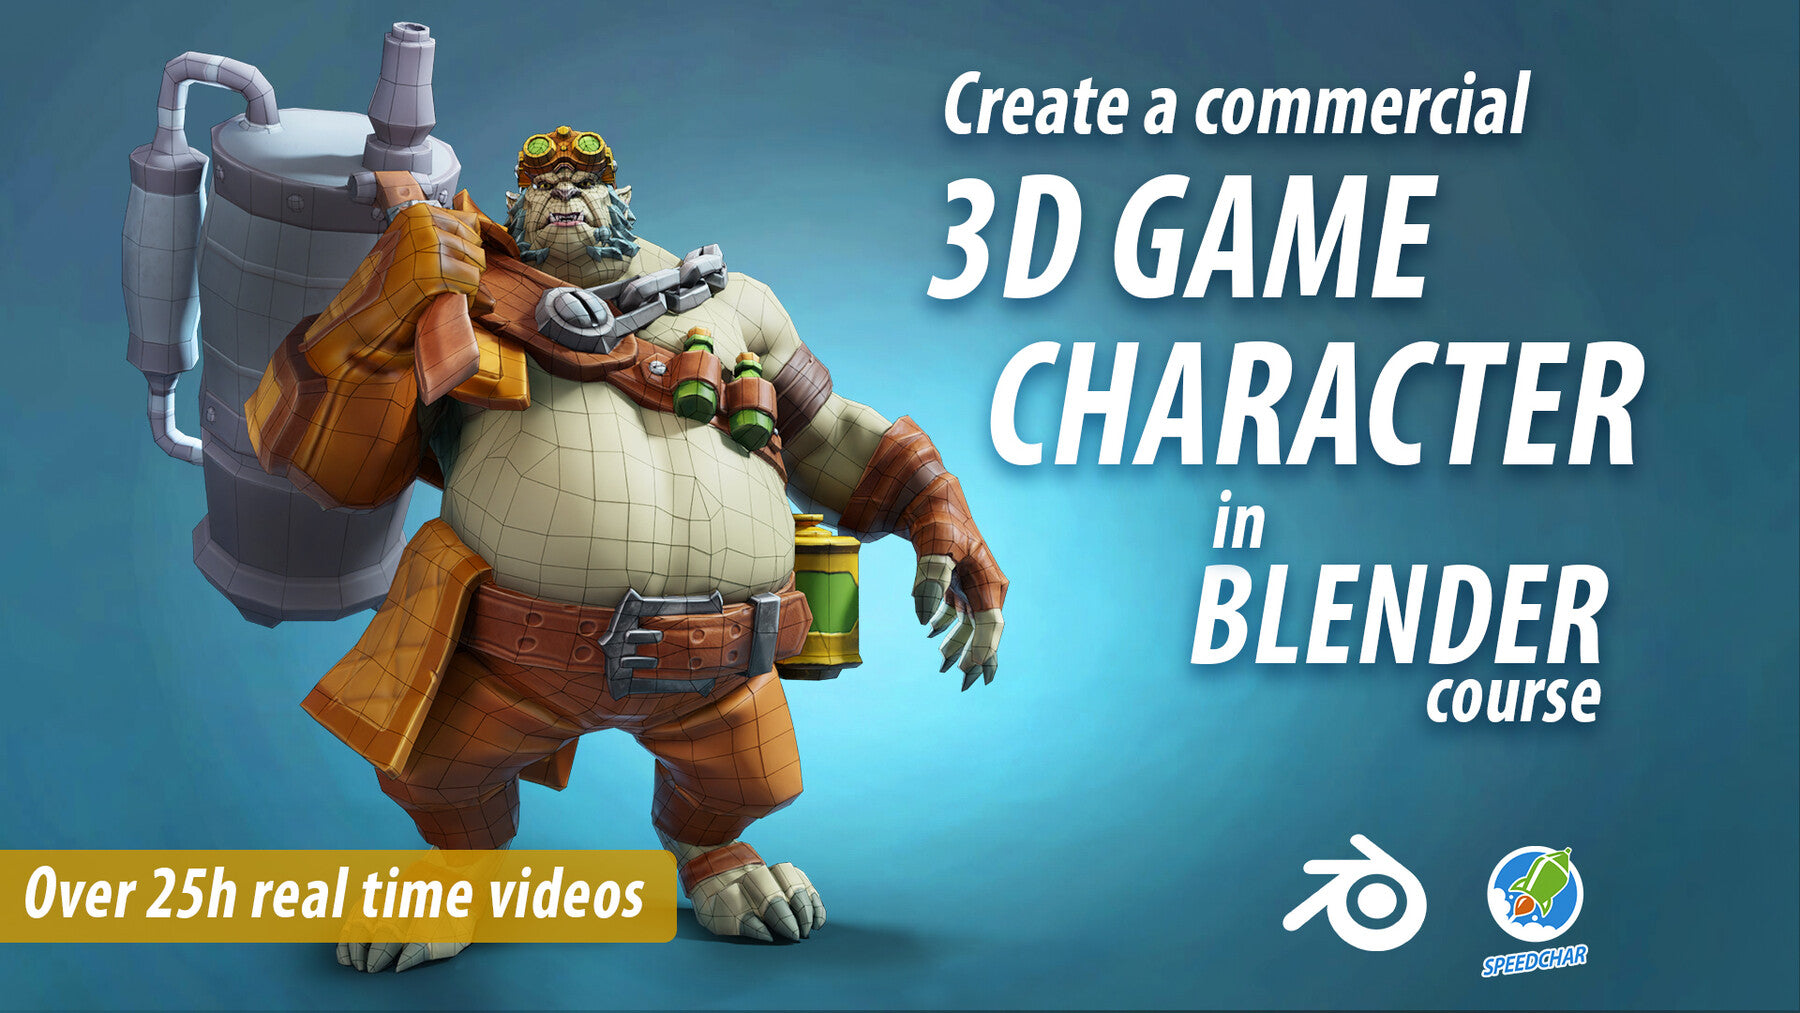 Create a Game-Ready 3D Character in Blender